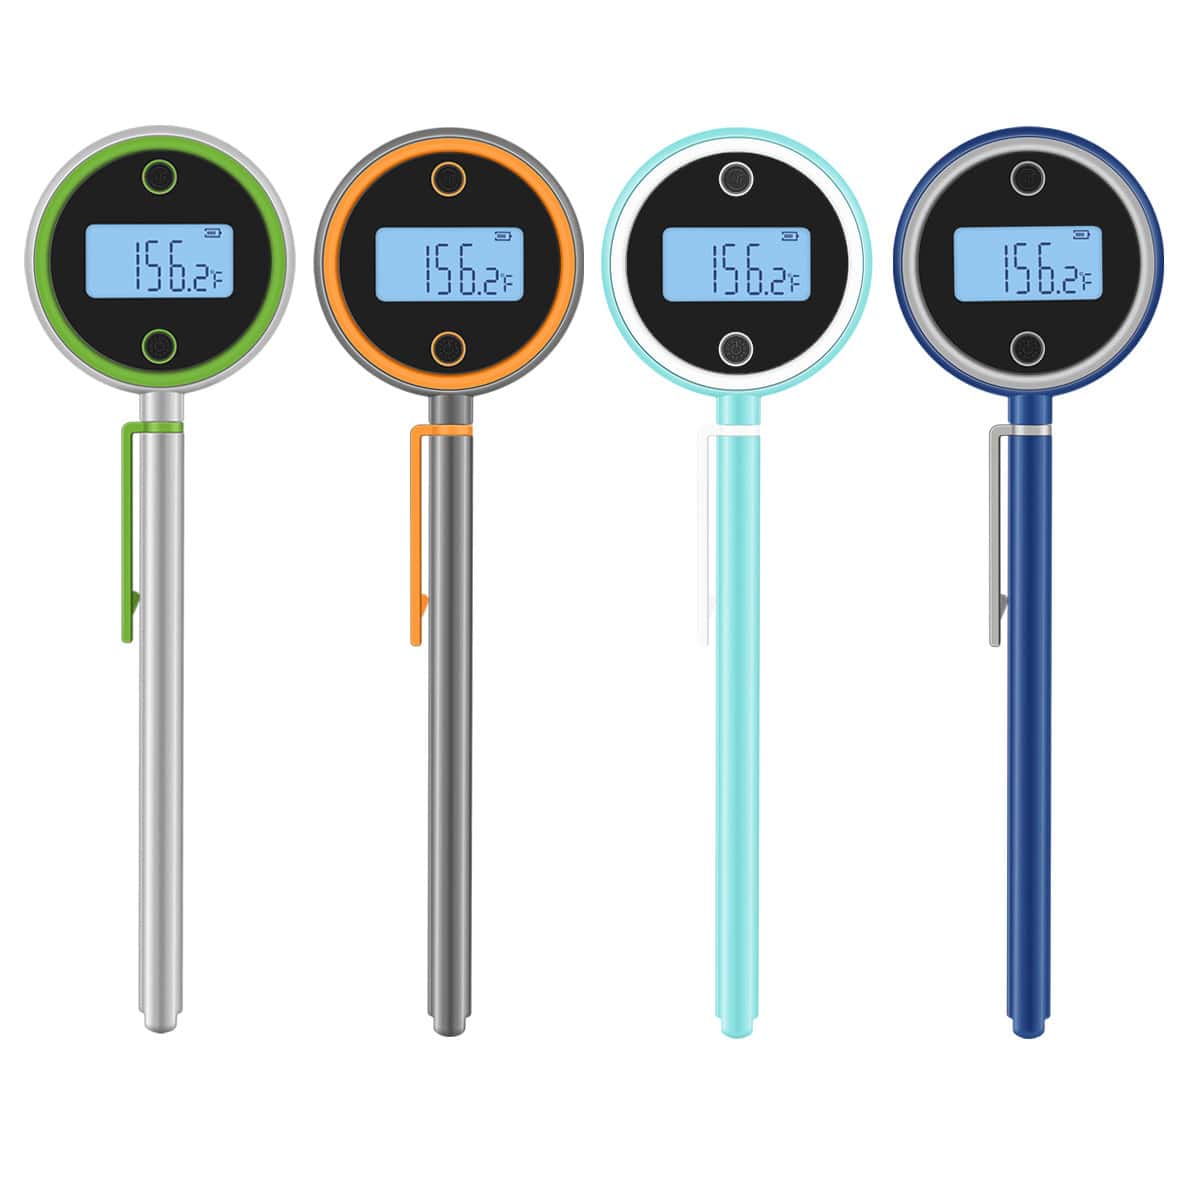 https://www.chefstemp.com/wp-content/uploads/2021/08/chefstemp-pocket-pro-cooking-thermometer-01.jpg